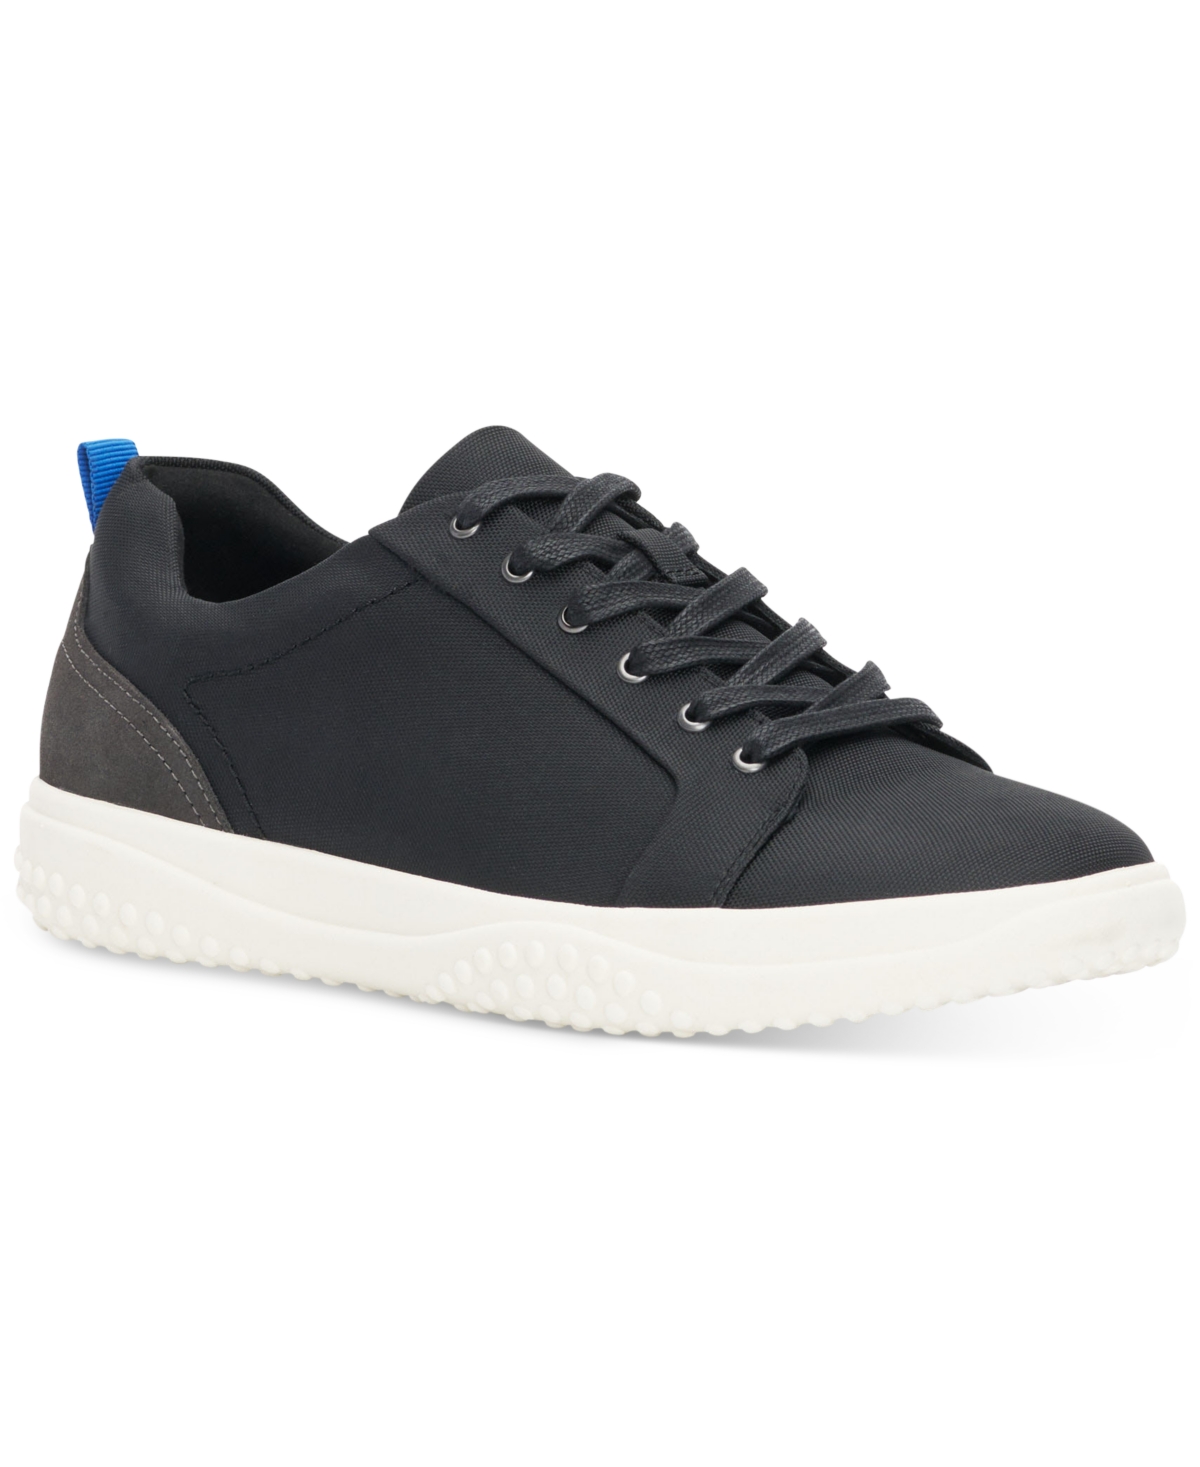 VINCE CAMUTO MEN'S HARDELL CASUAL SNEAKER